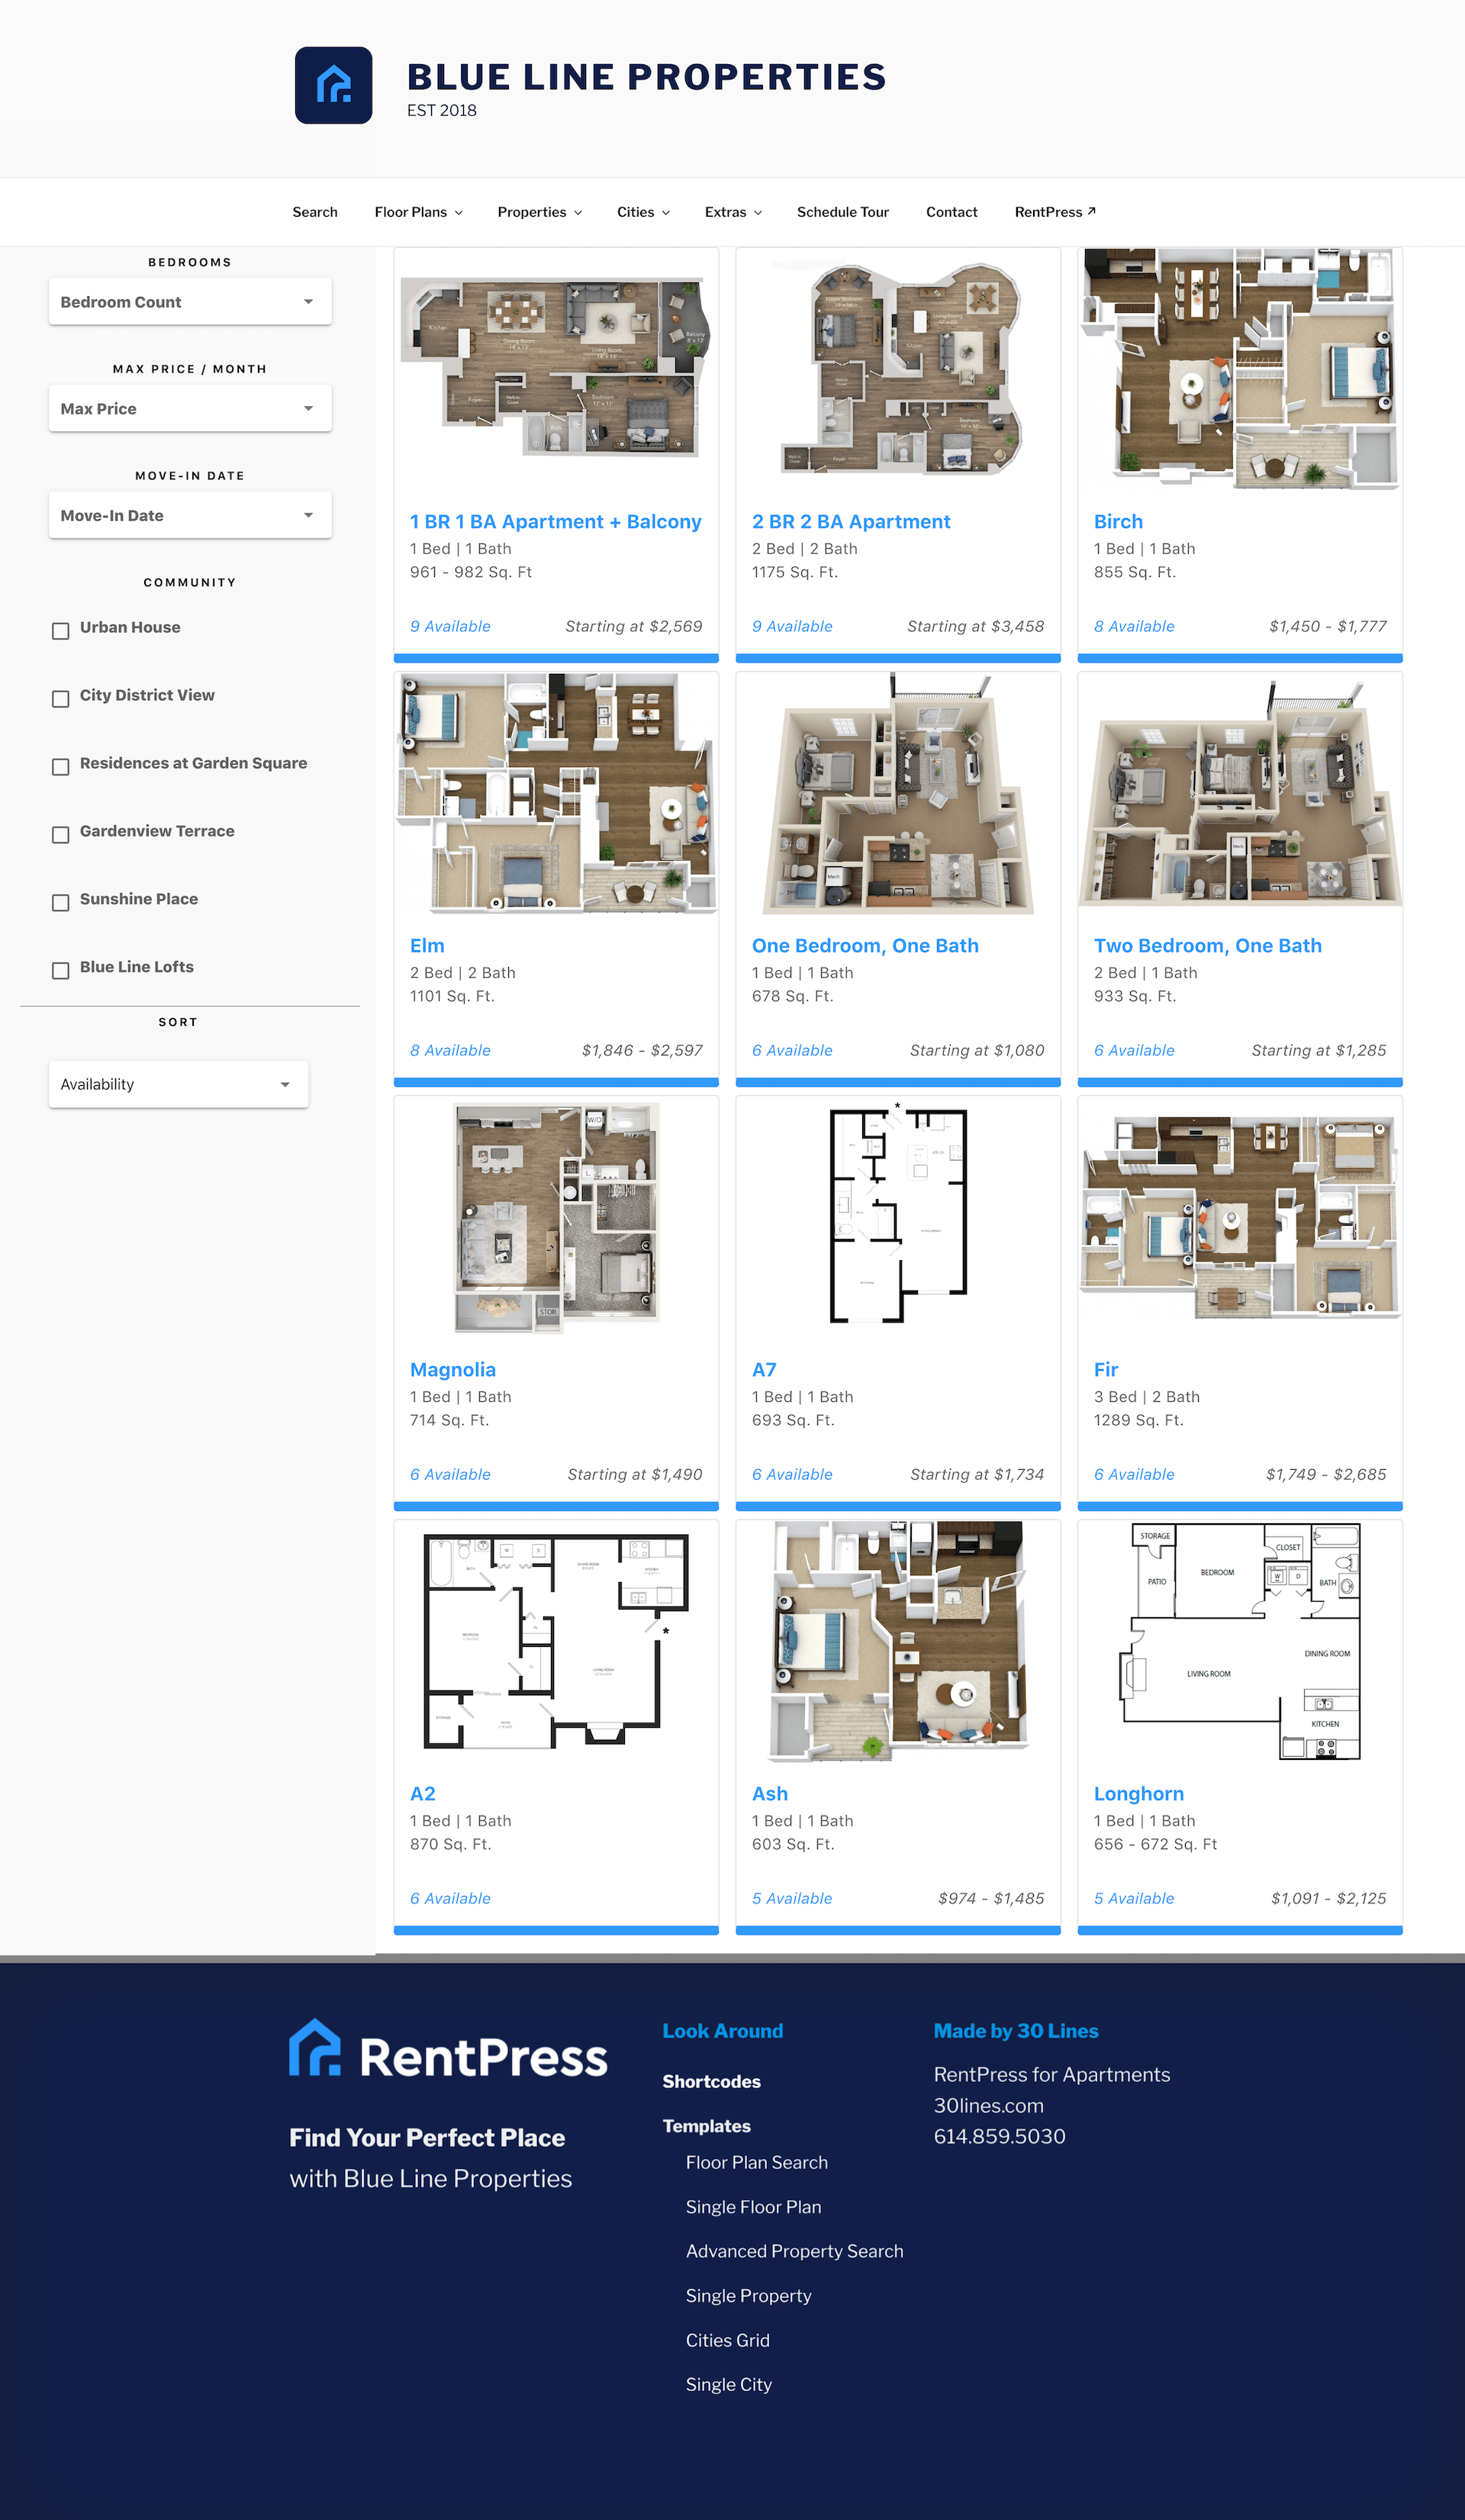 The floor plan search template provided by RentPress.